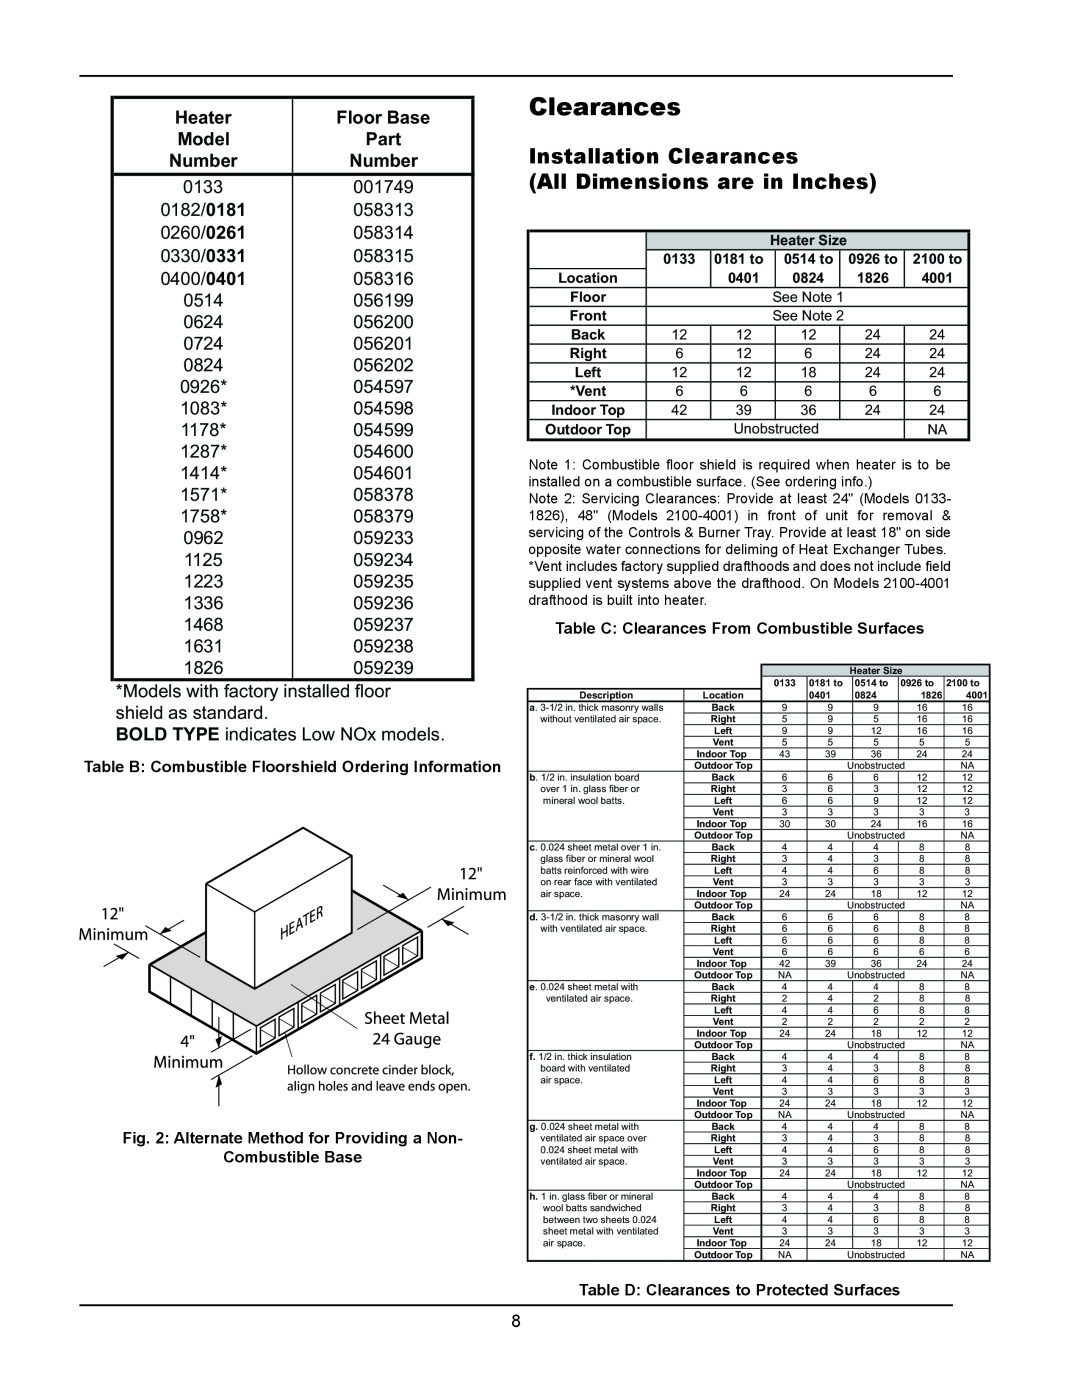 Raypak 1334001 Installation Clearances, All Dimensions are in Inches, Heater, Floor Base, Model, Part, Number 